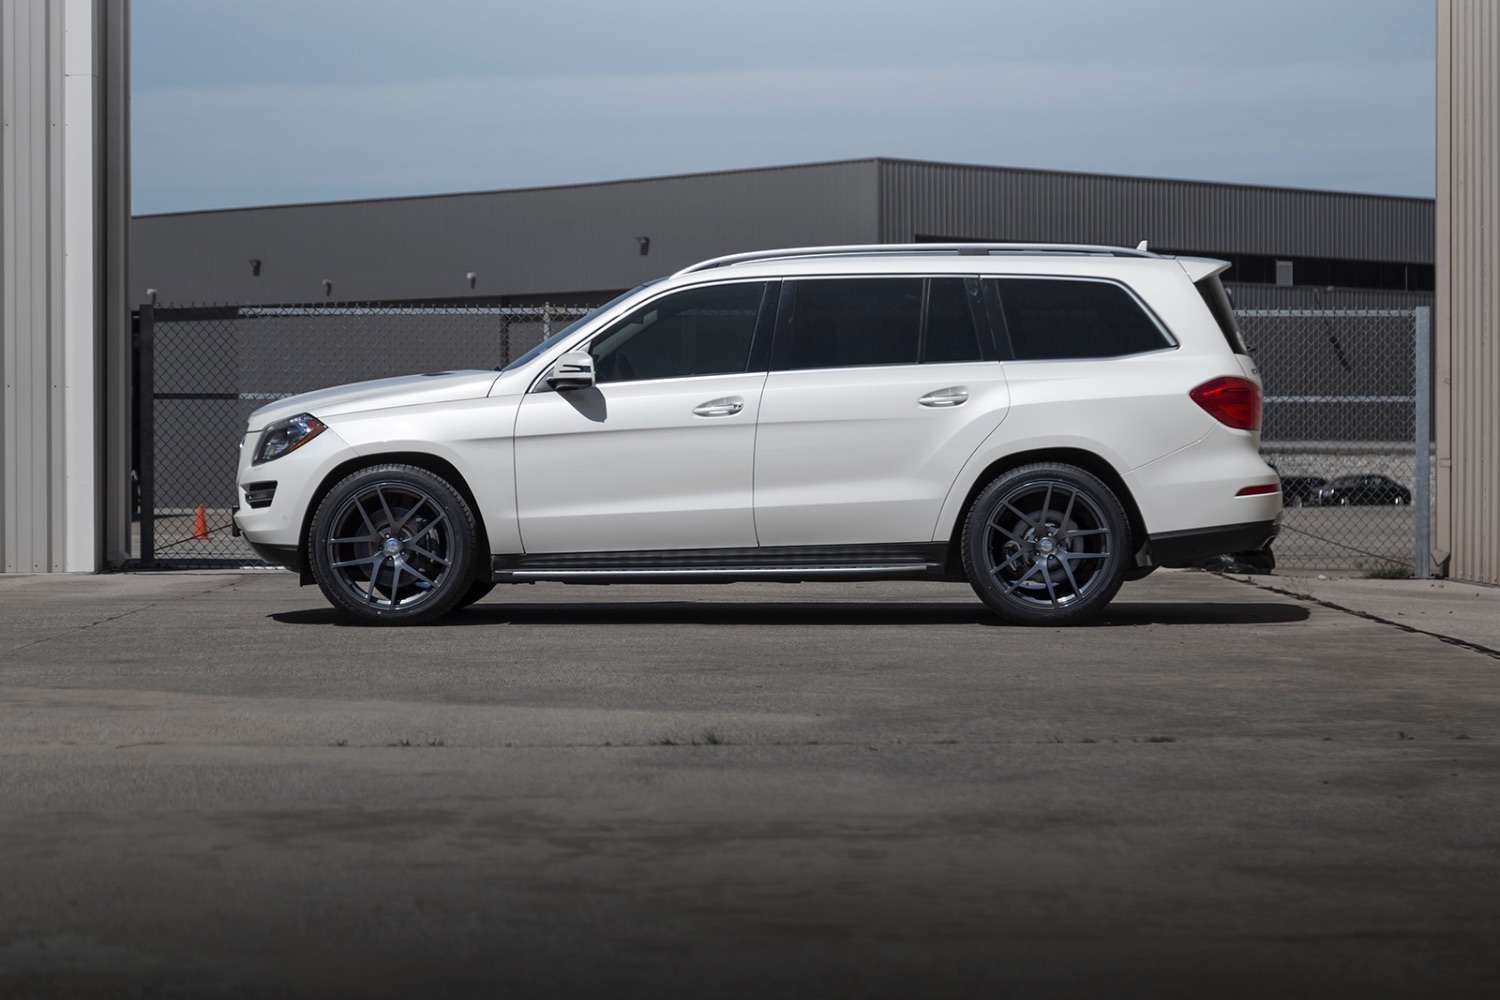 Mercedes-Benz GL Class with 22×10-inch Modulare B18